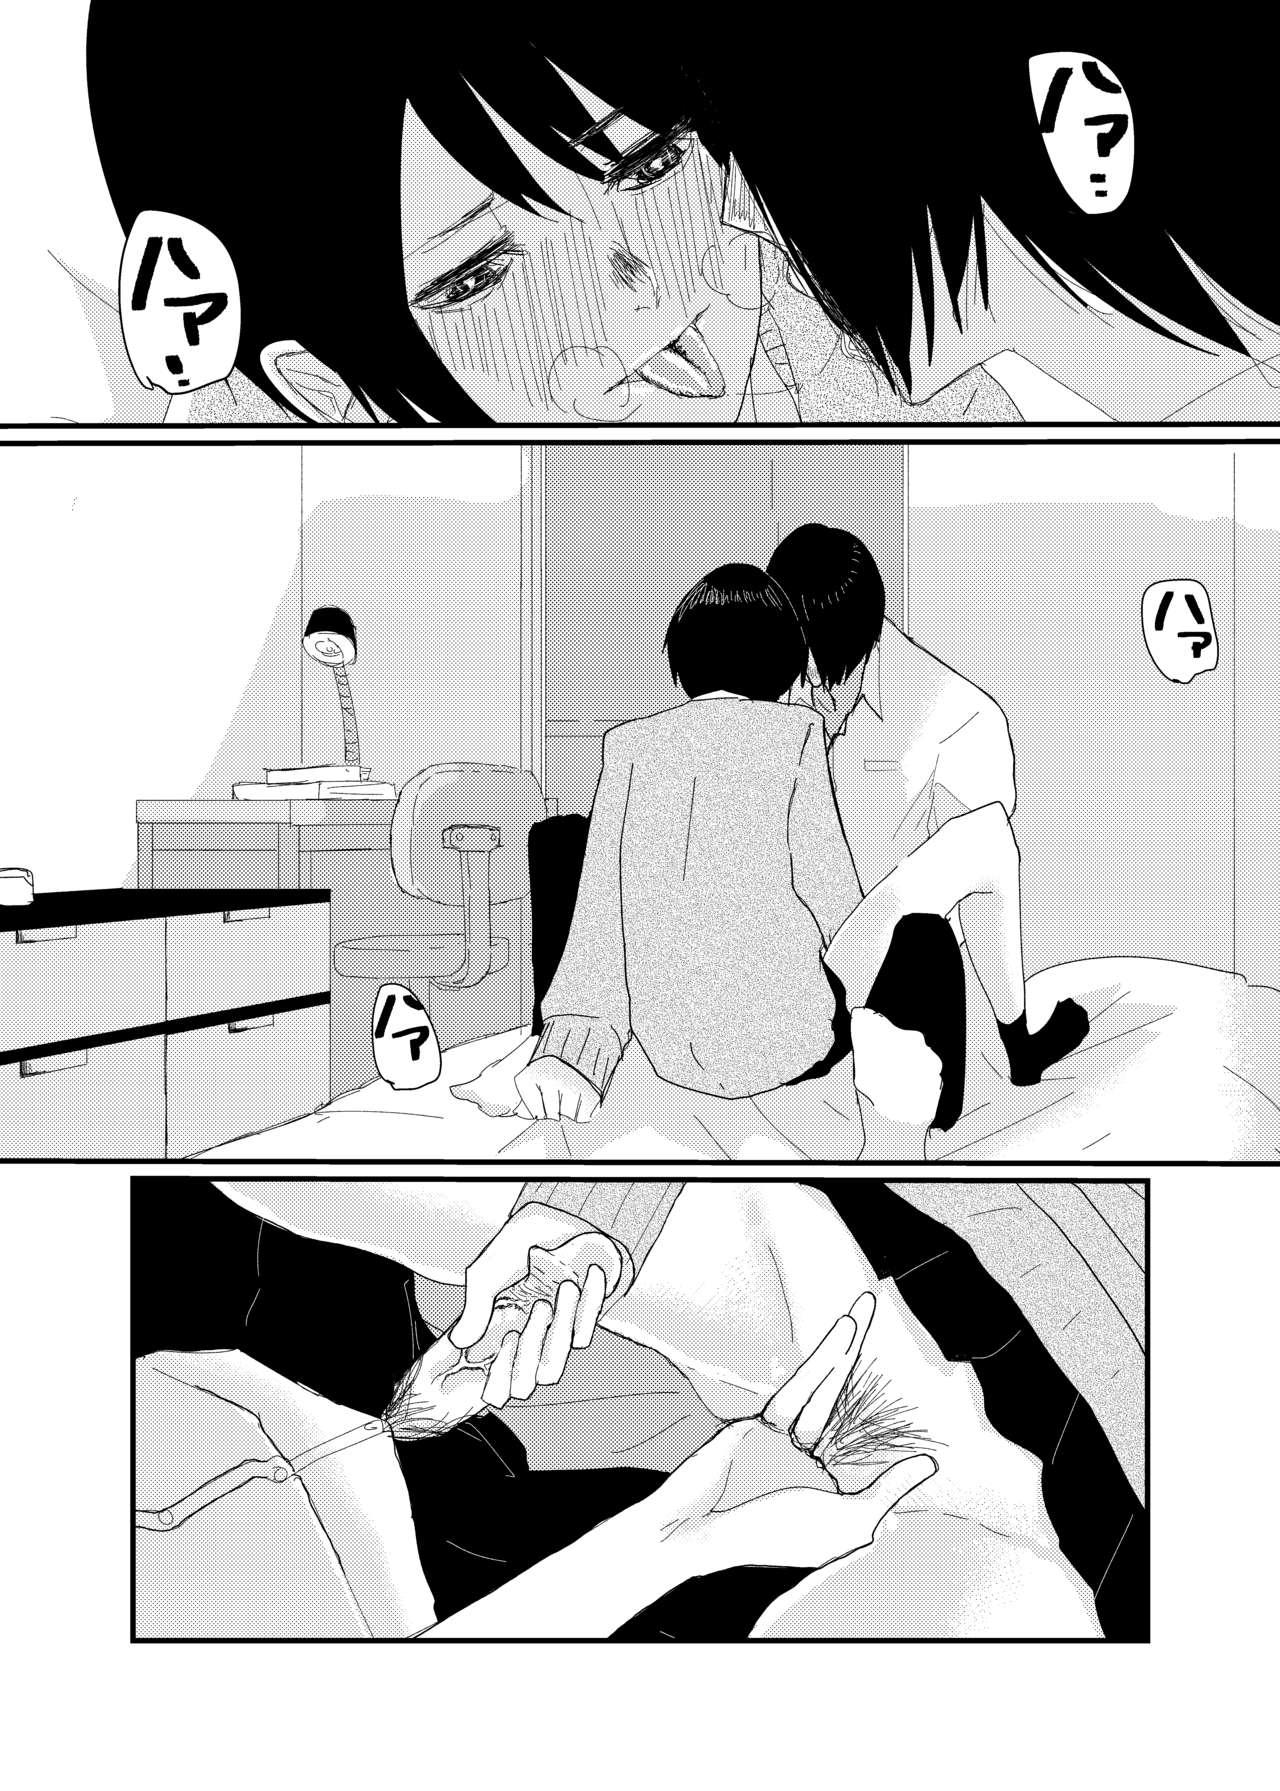 From 前描いたエロ漫画 Oldvsyoung - Page 7